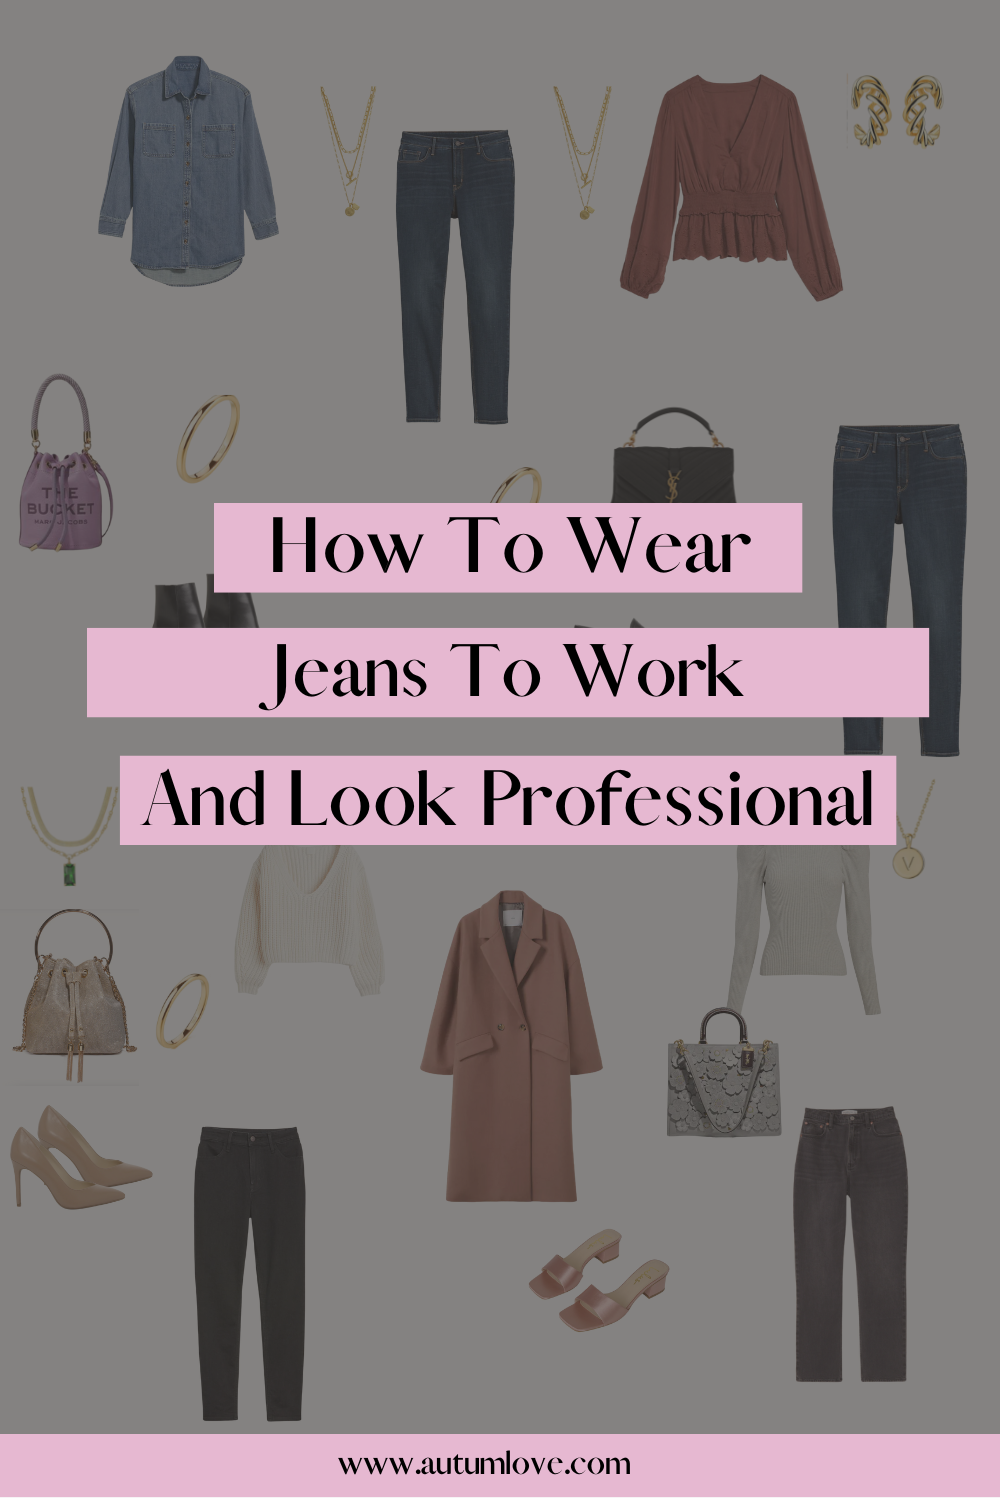 How to Wear Jeans to Work